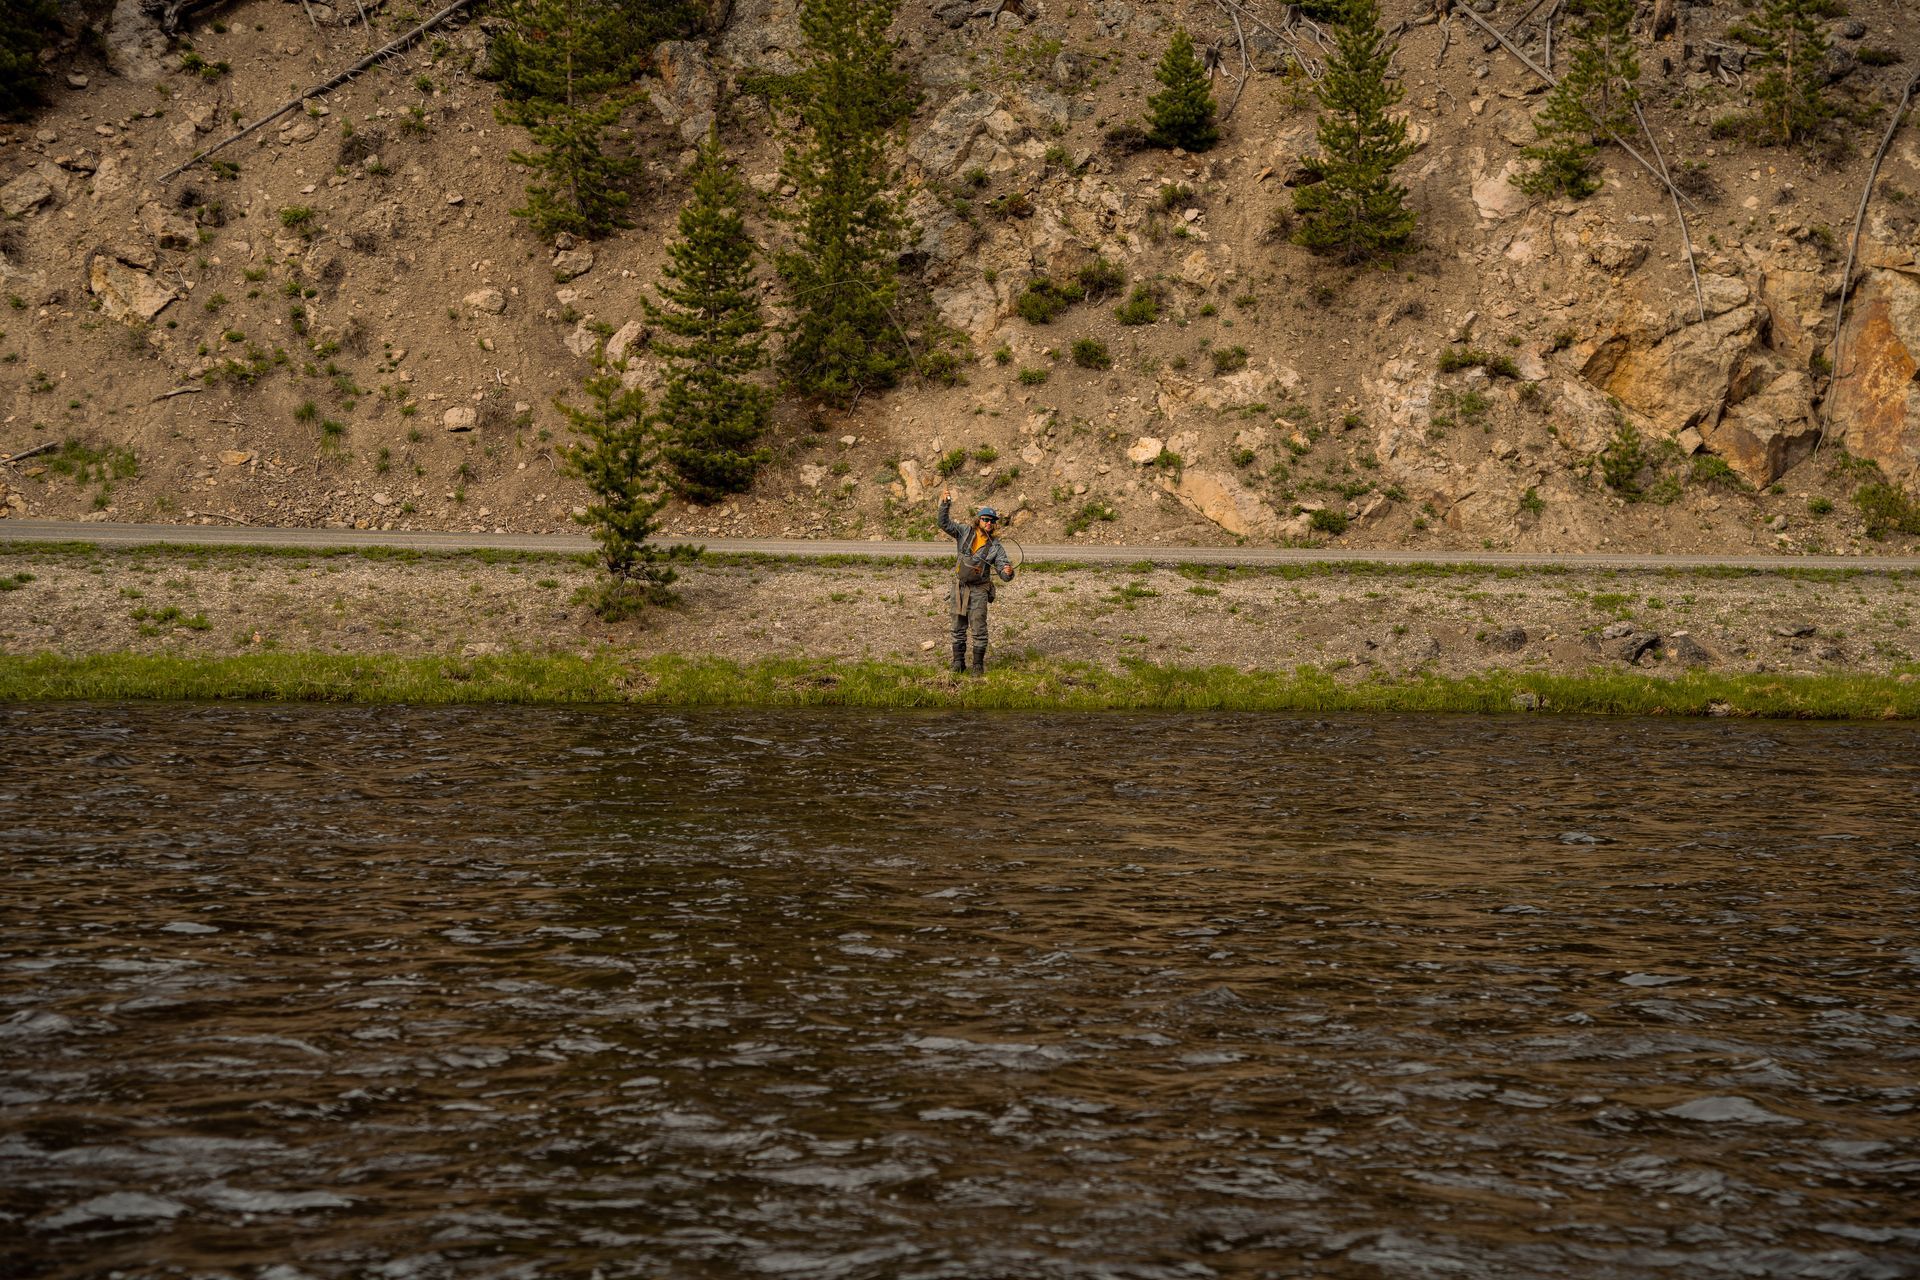 Fisherman in Yellowstone National Park on the Firehole River.